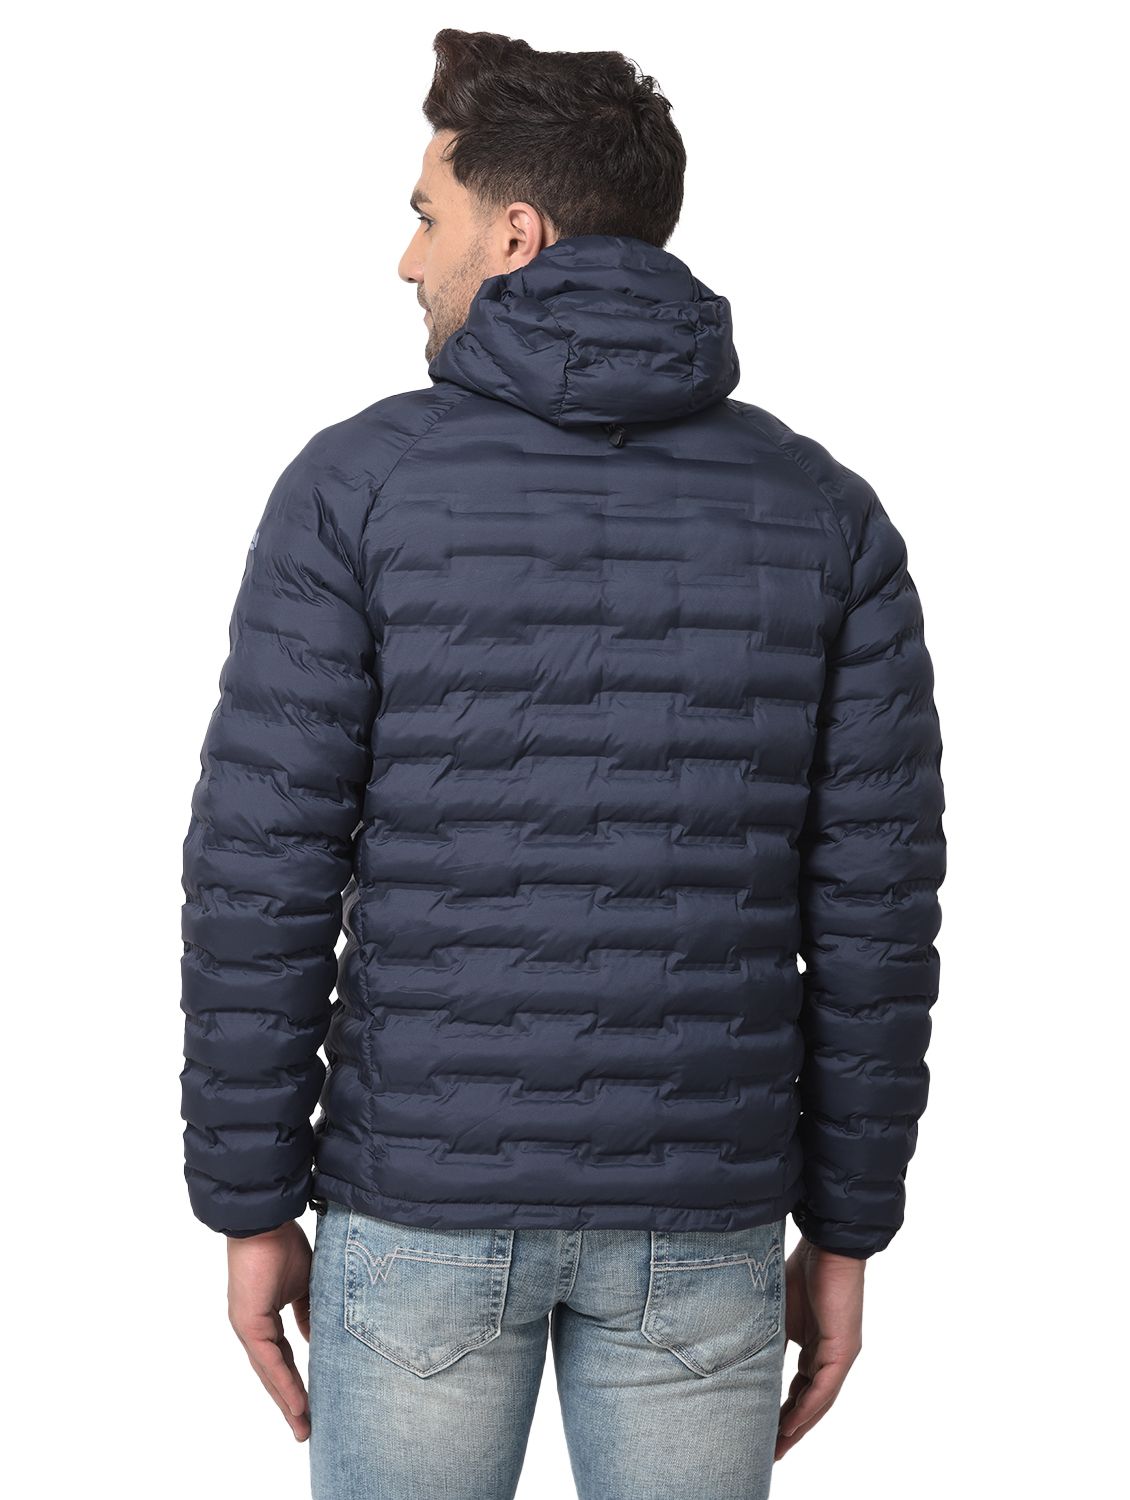 Navy quilted jacket for men